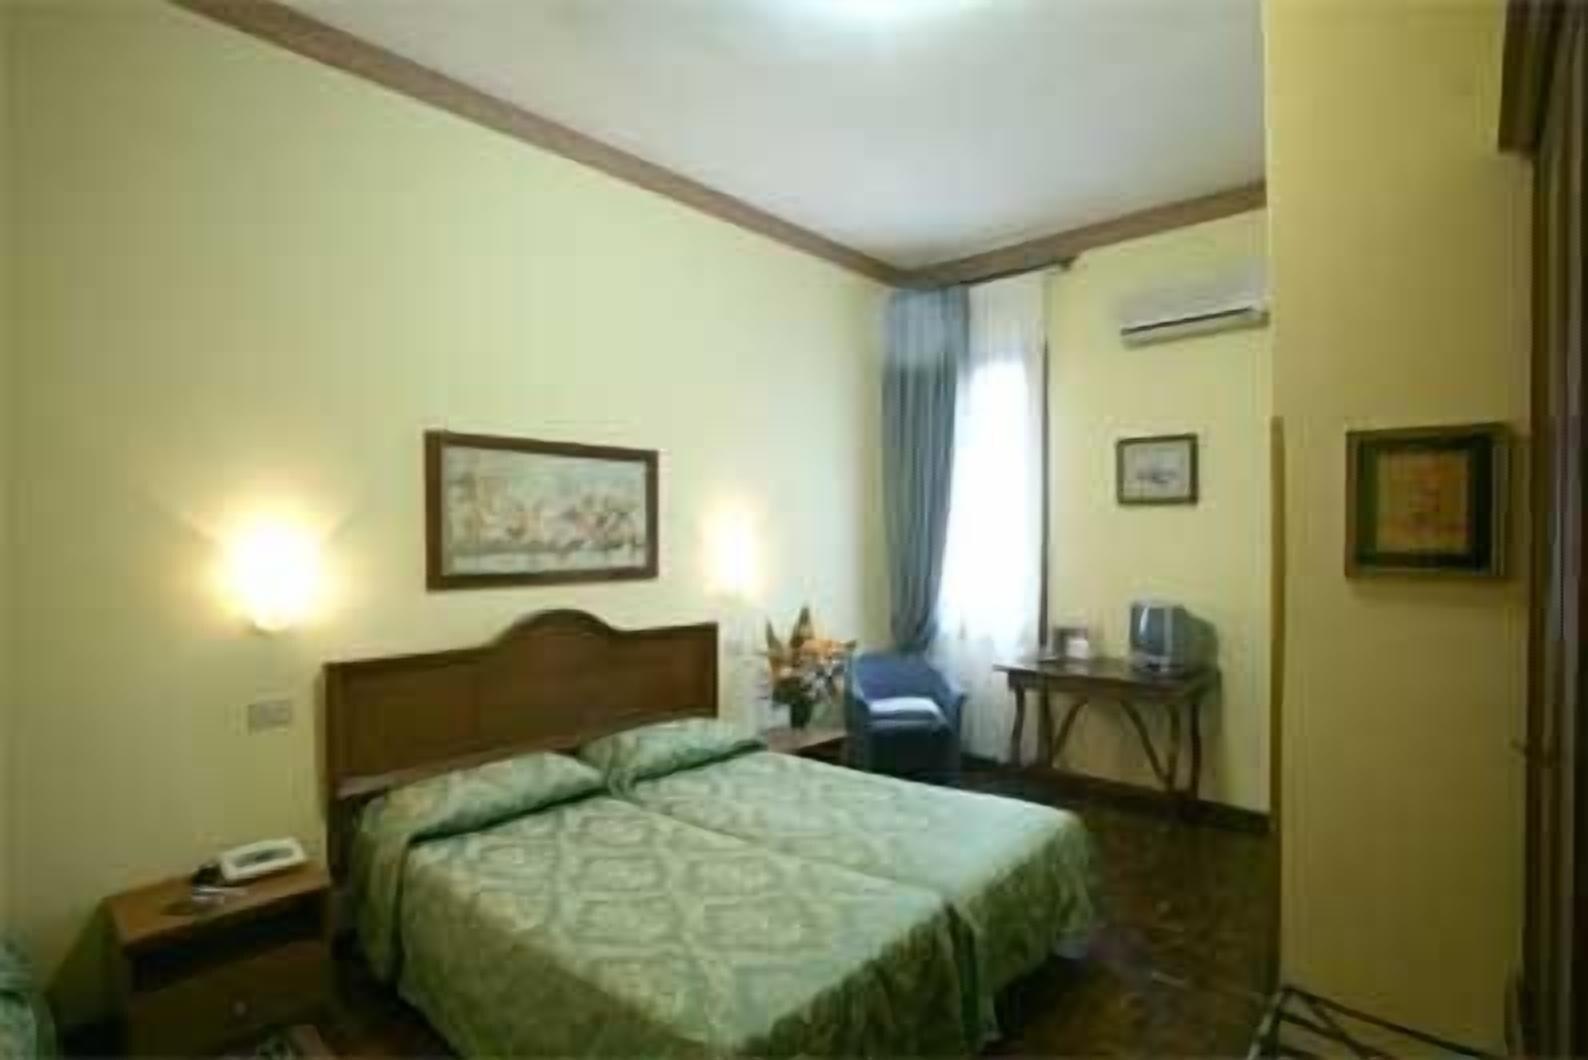 HOTEL FLORIDA VENICE 2* (Italy) - from US$ 53 | BOOKED